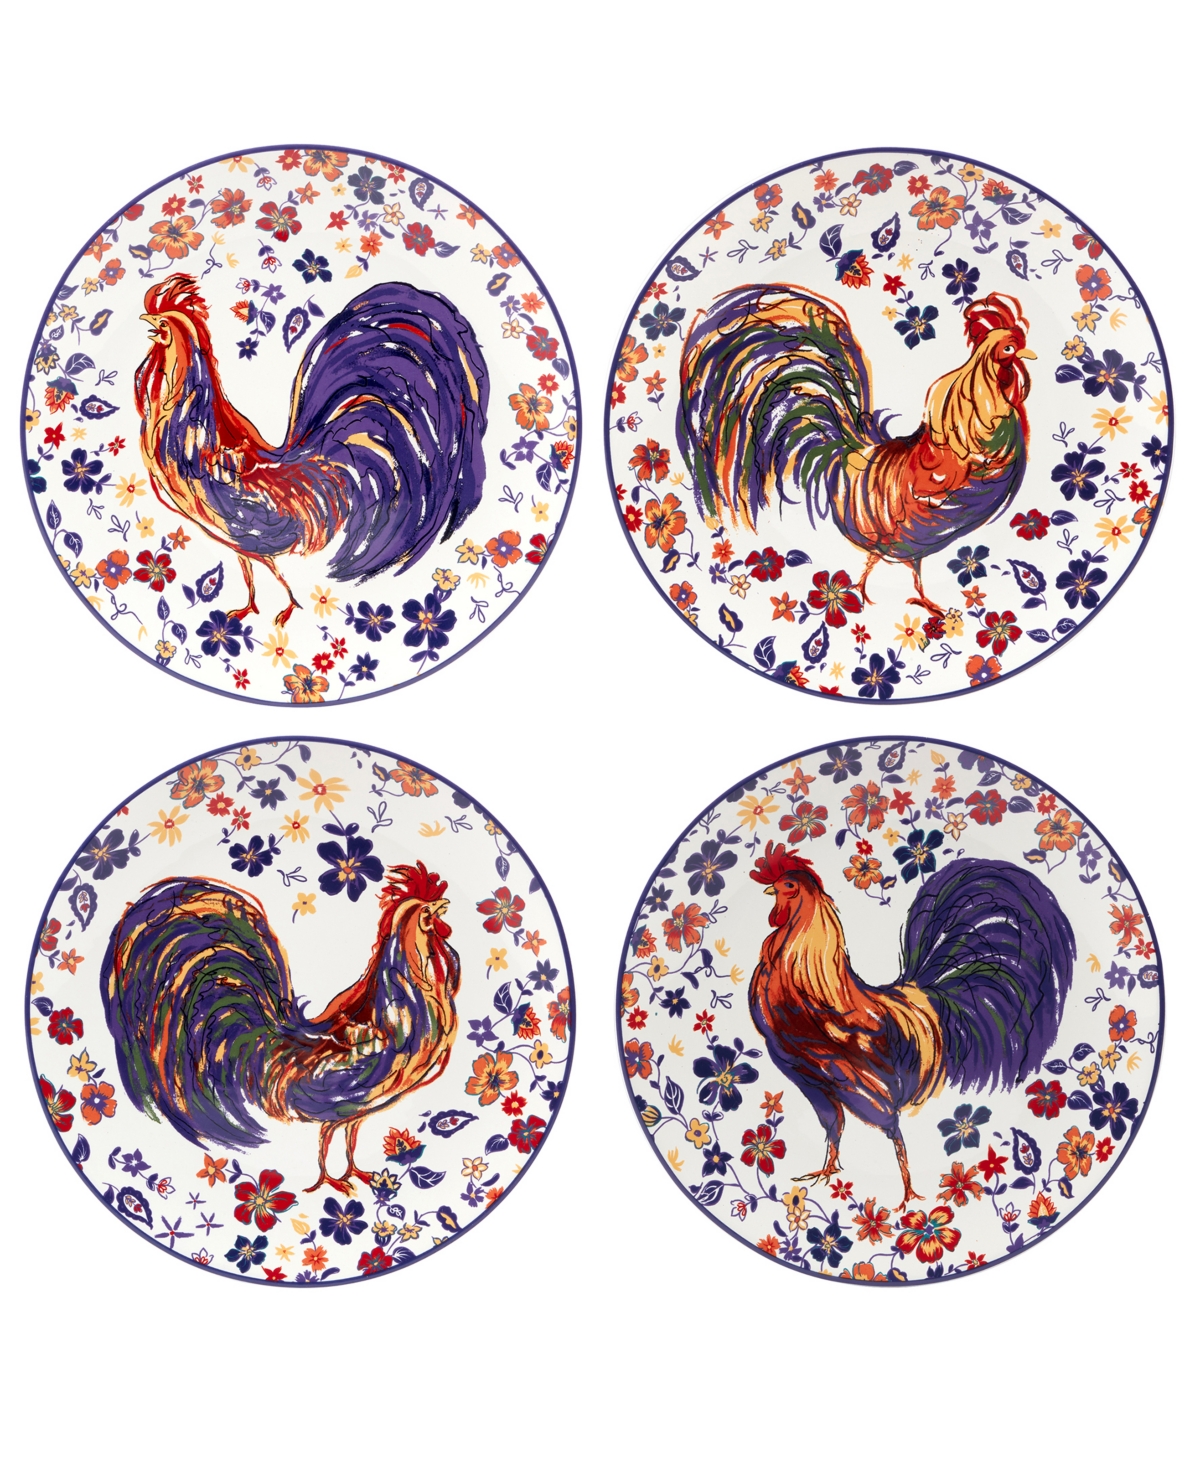 Morning Rooster Set of 4 Dinner Plates - Miscellaneous